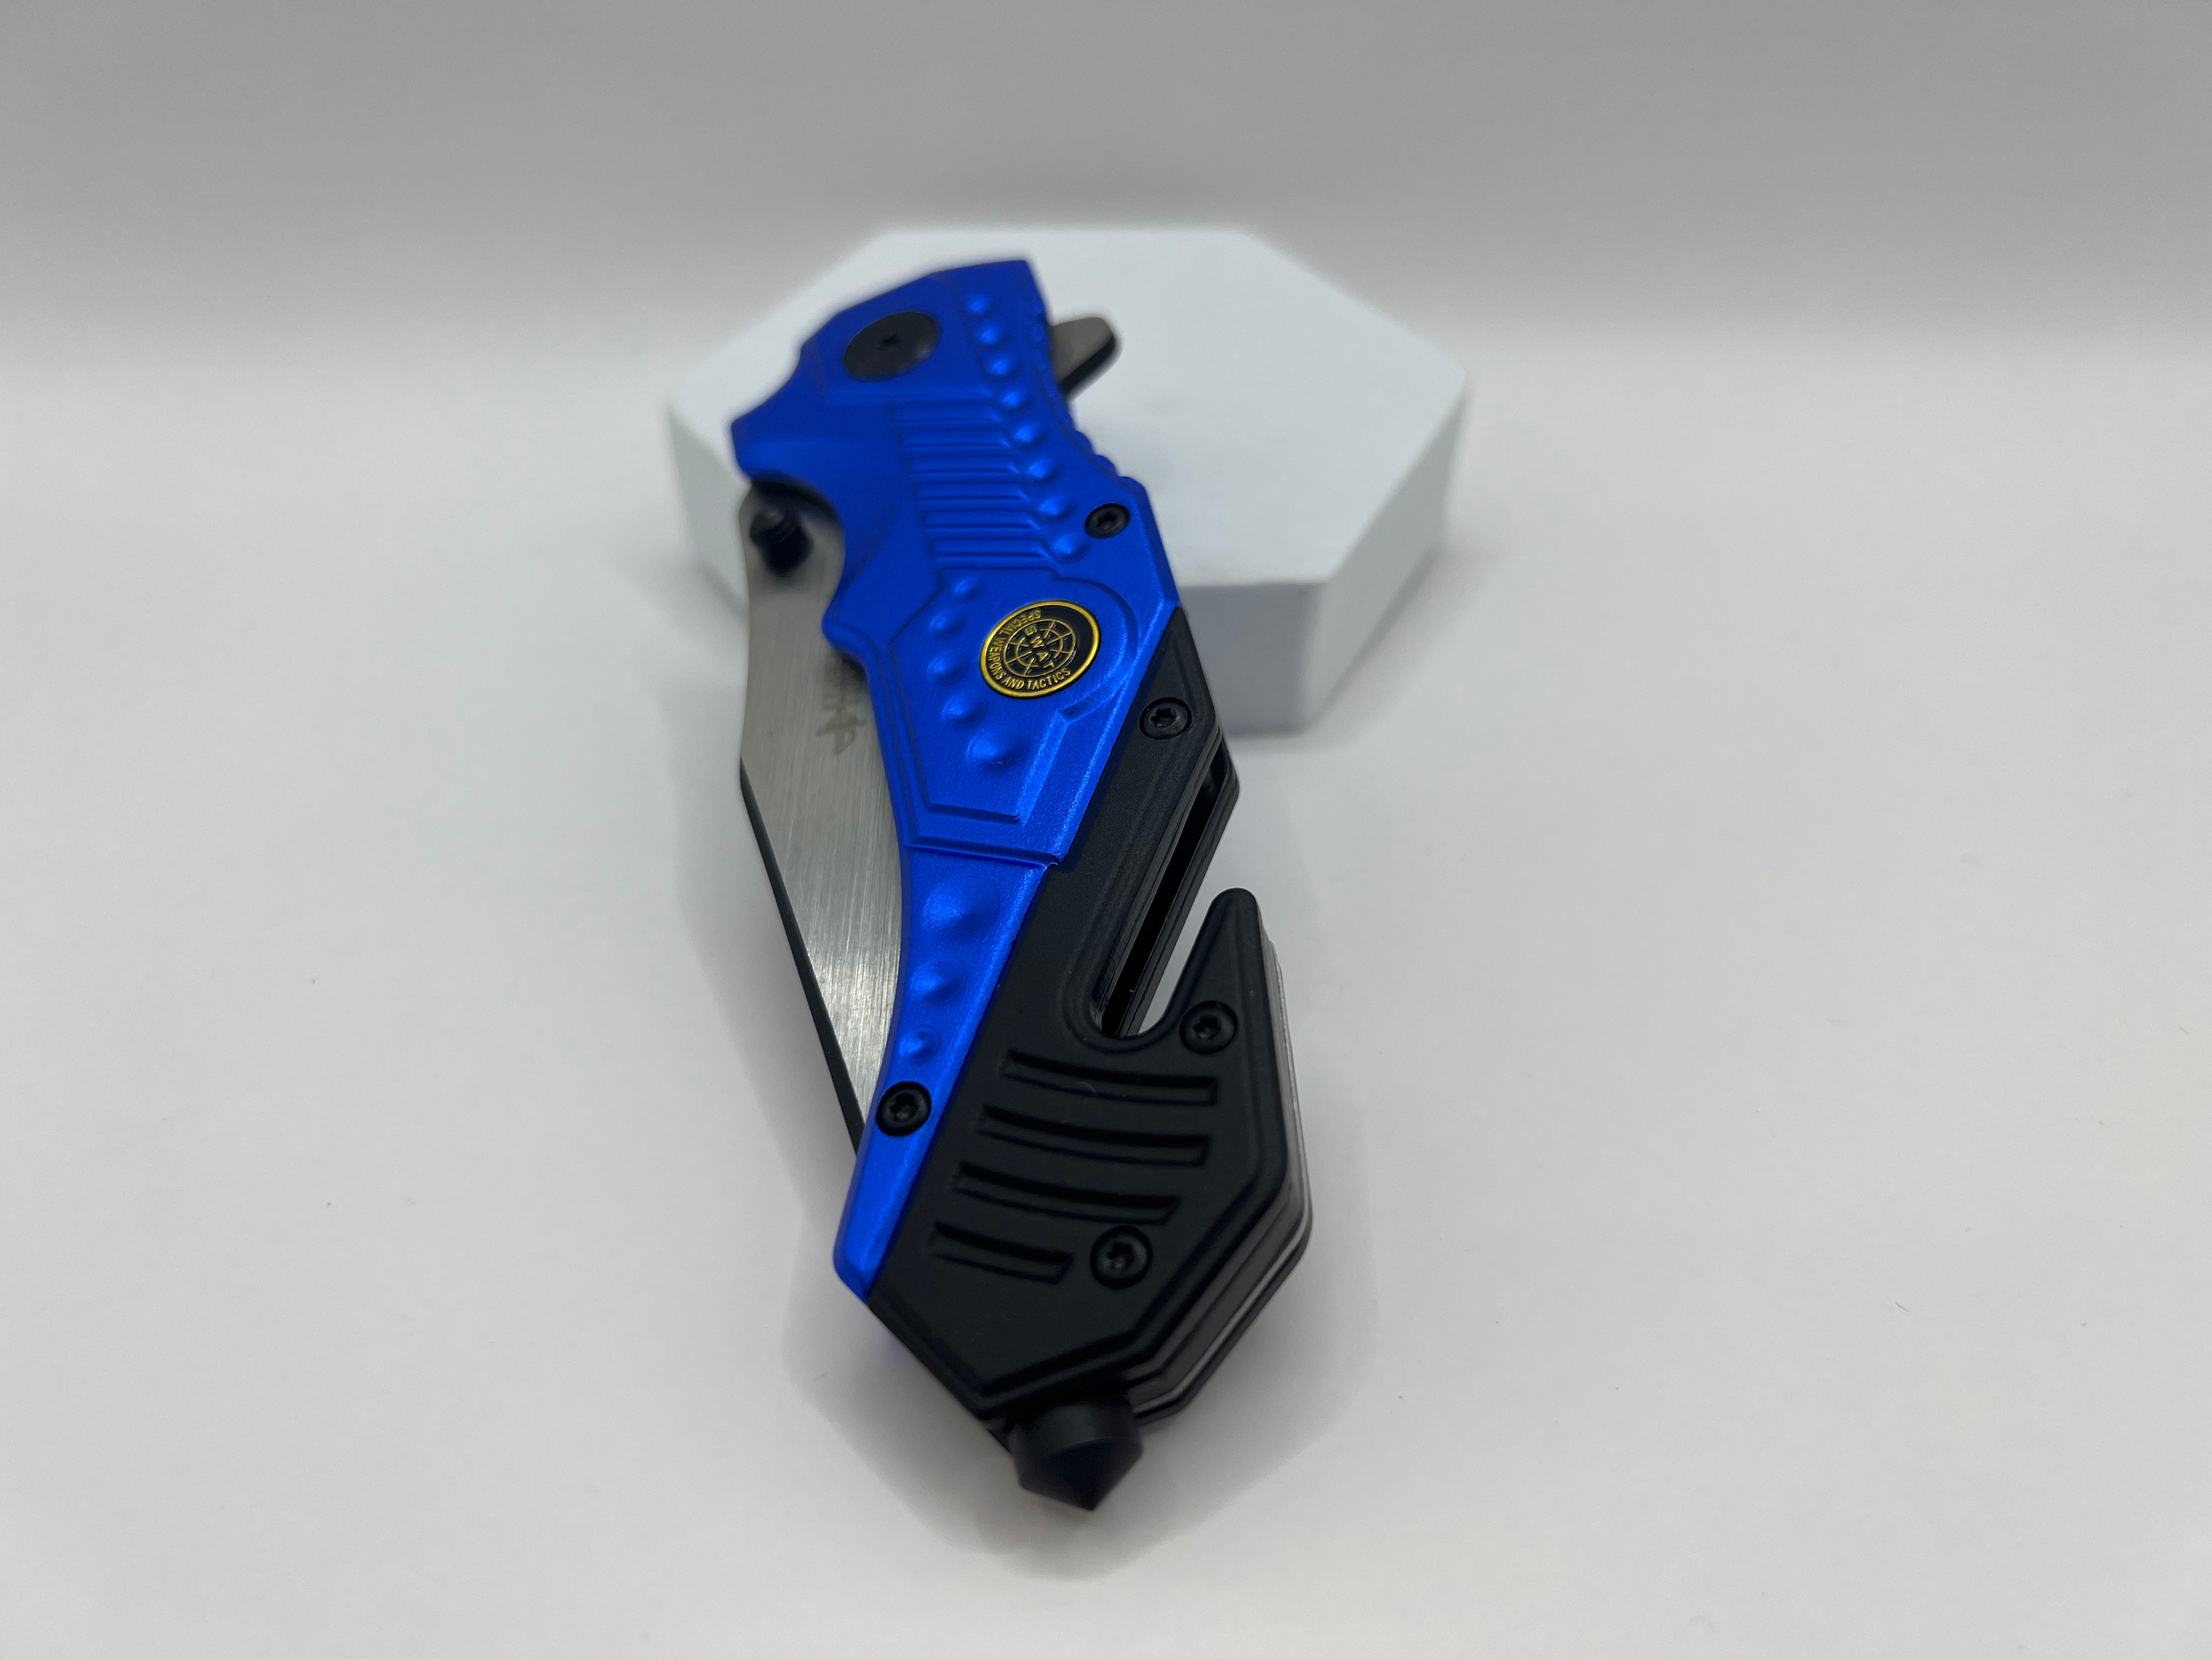 Haller Rescue Pocket Knife Blue - Robust rescue knife with partially black blade